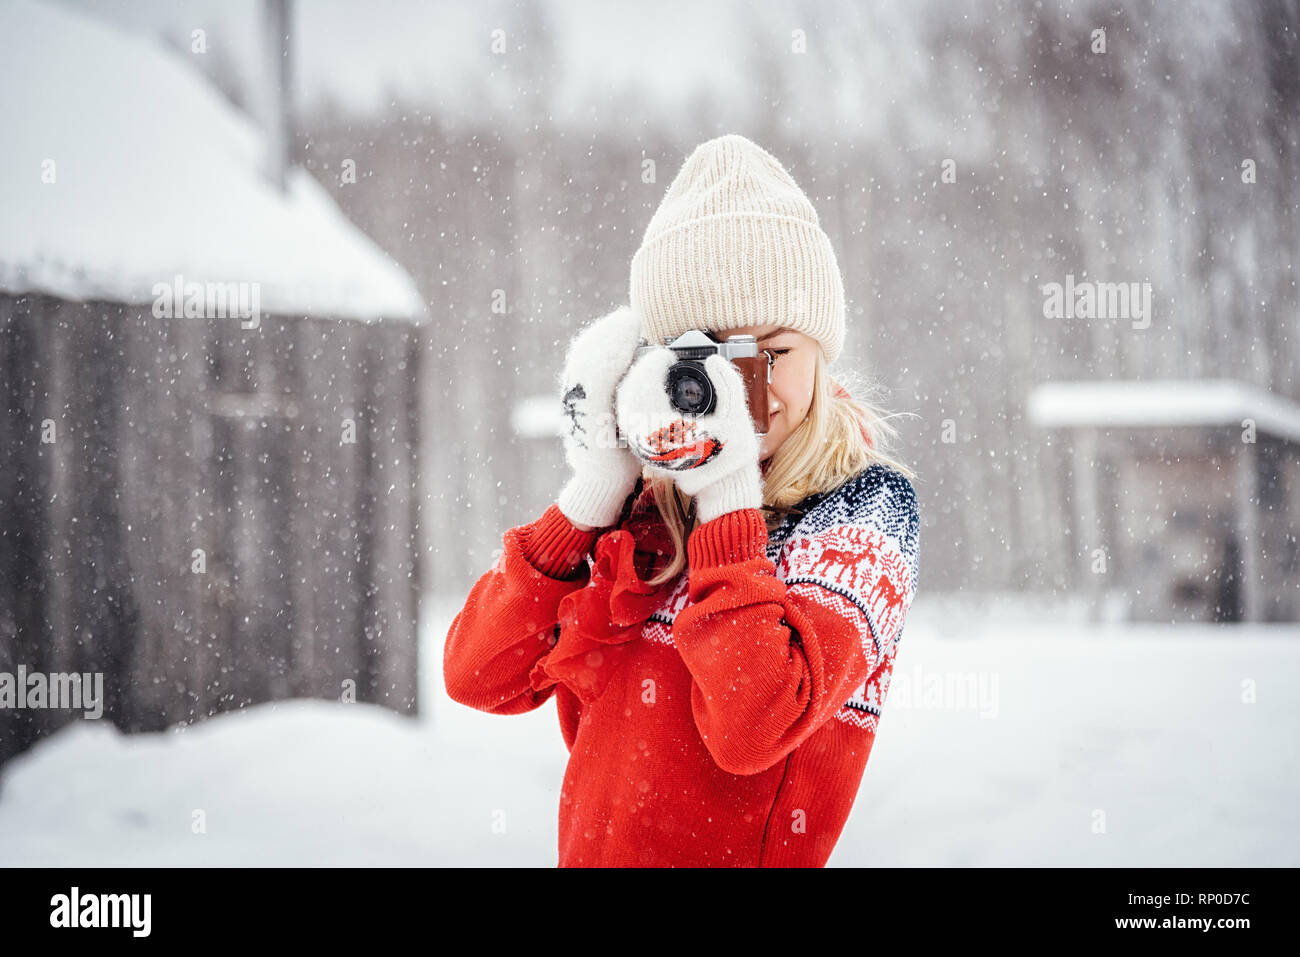 Nikola-Lenivets, Russia - January 26, 2019: Beautiful girl in a red sweater with a vintage camera Stock Photo